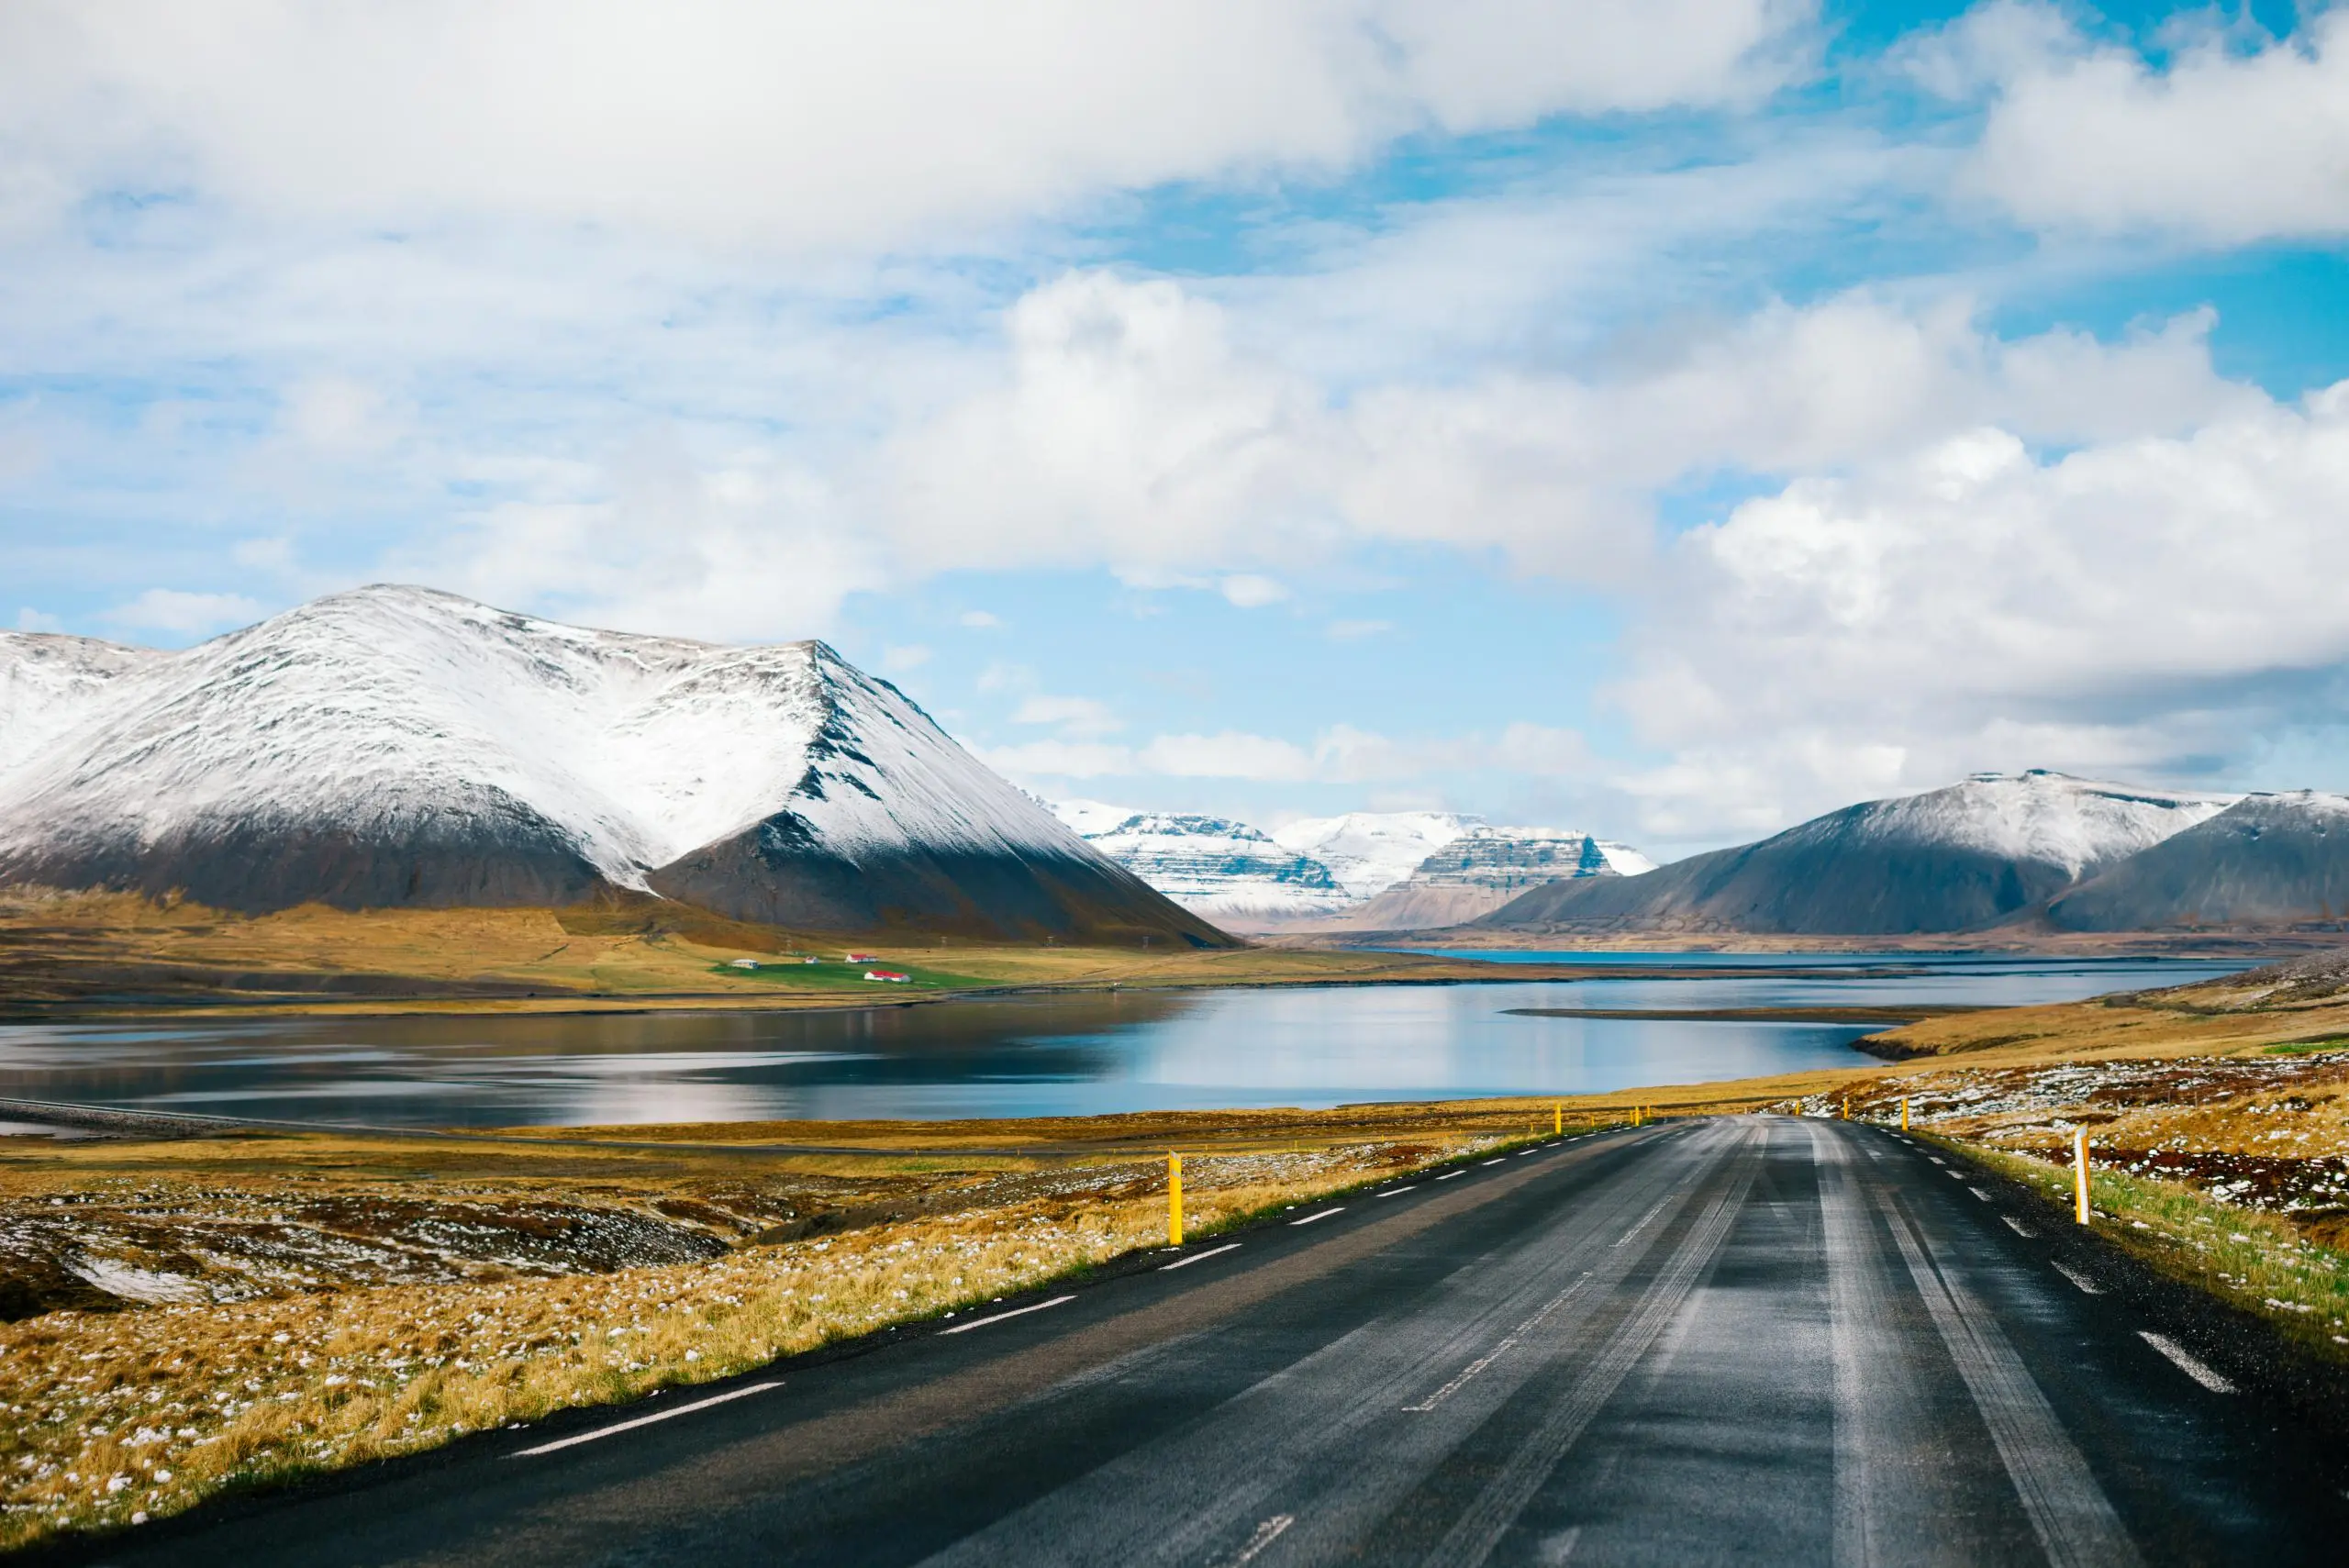 20 tips you should know for your first trip to Iceland